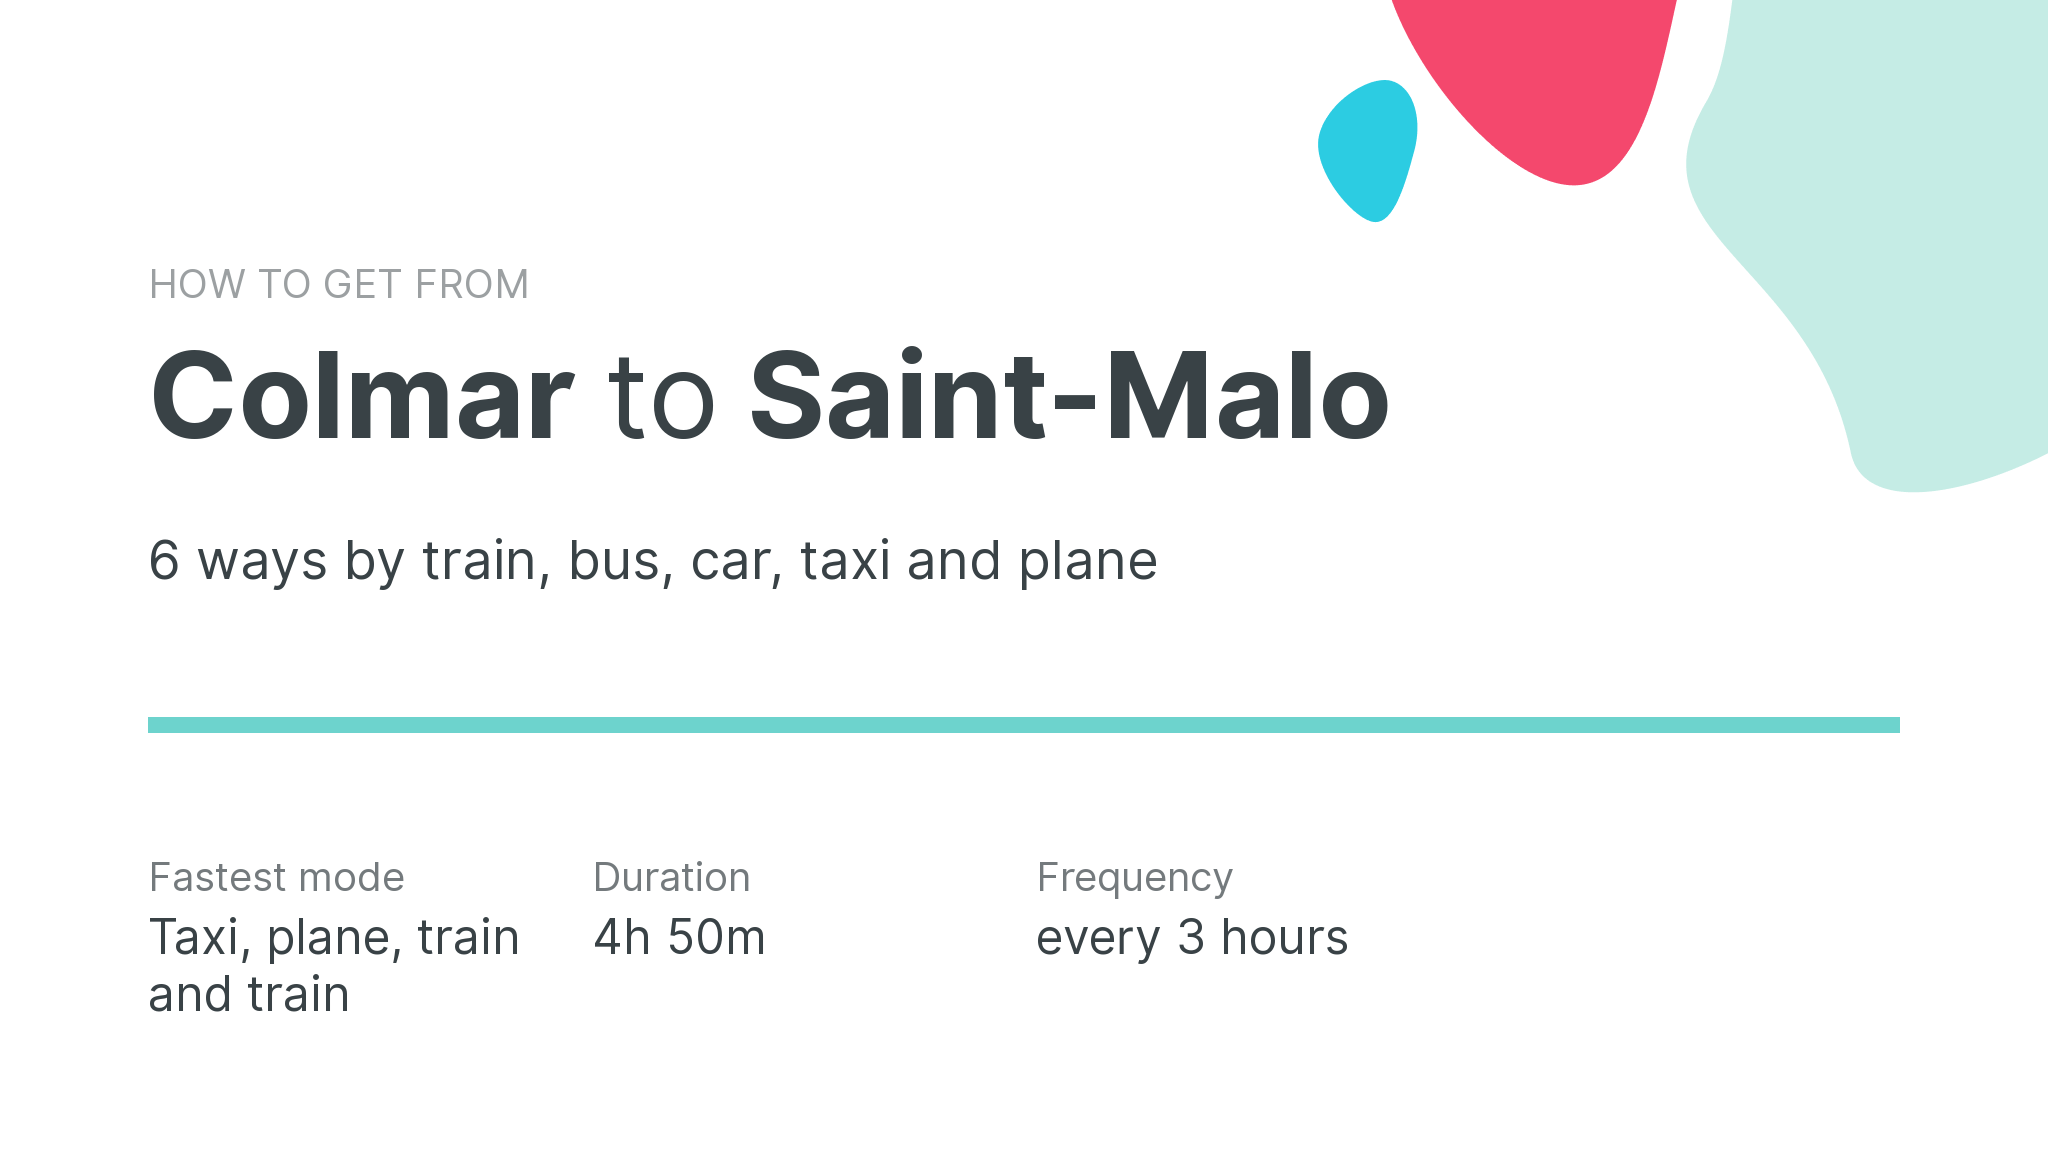 How do I get from Colmar to Saint-Malo